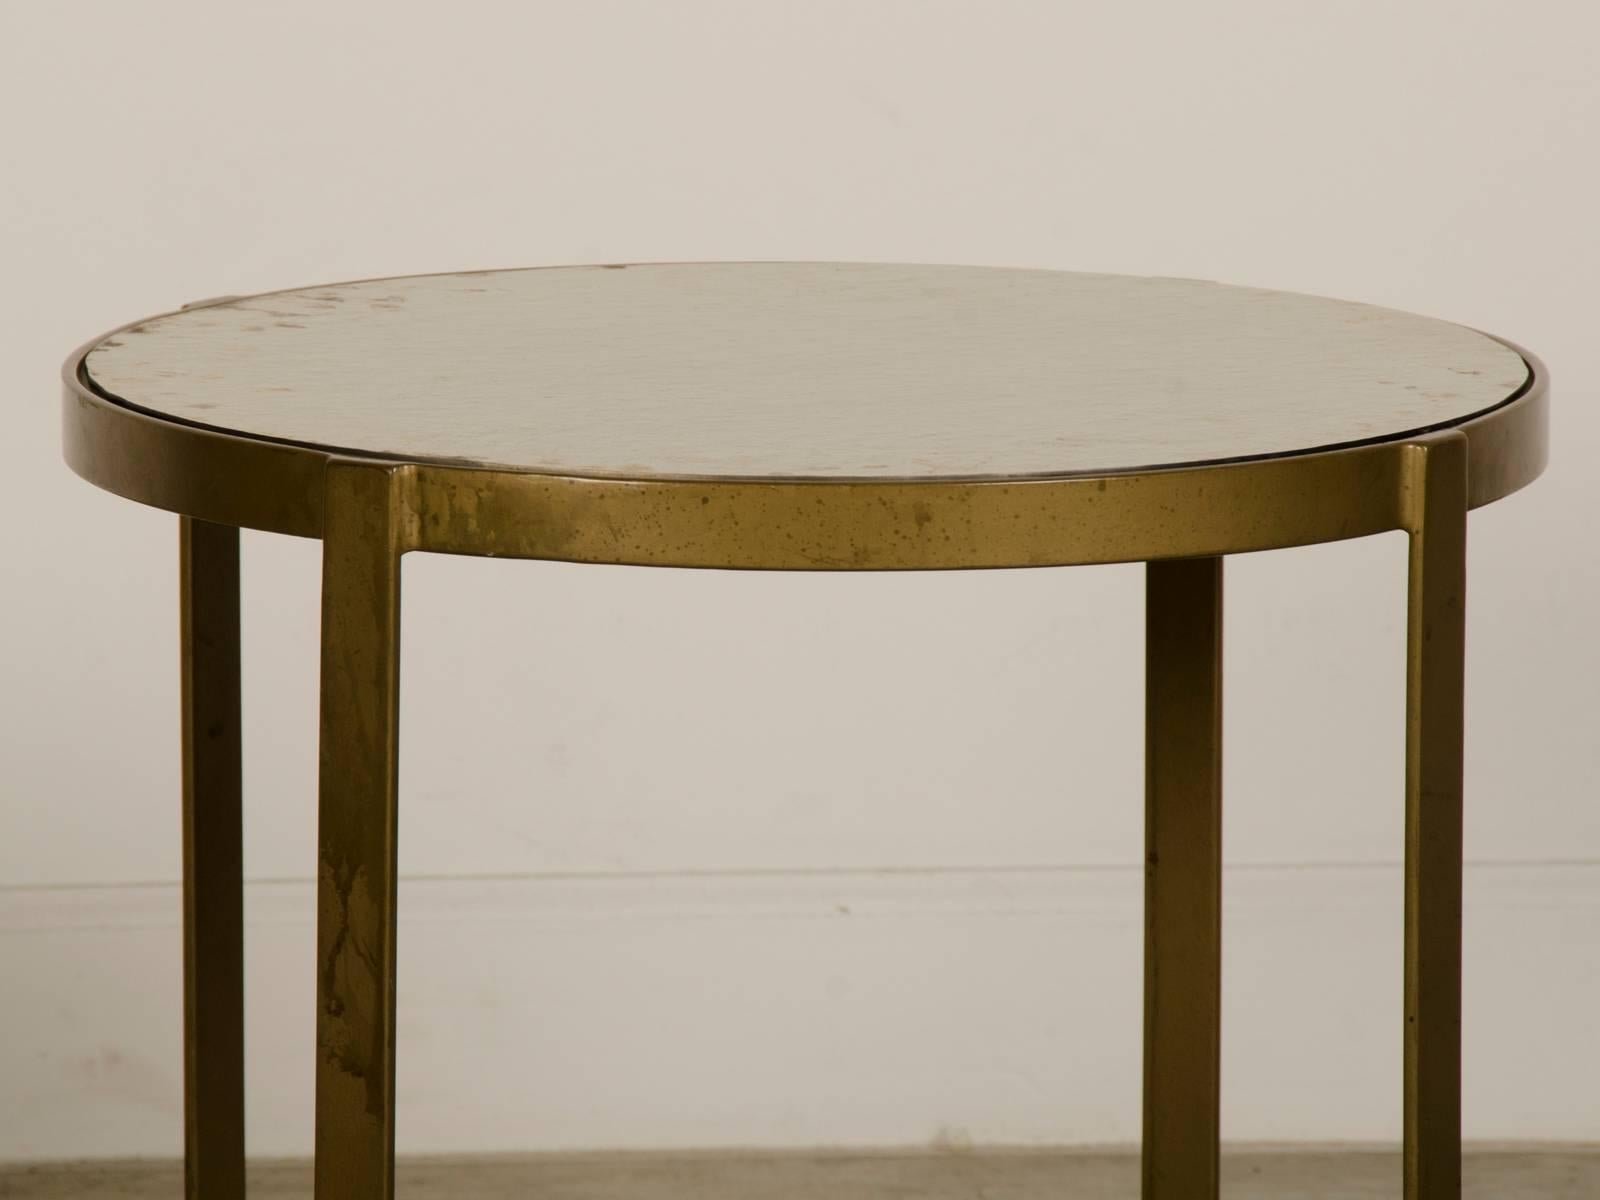 Vintage Italian Gilded Round Table, Pebbled Glass Top, circa 1960 In Excellent Condition For Sale In Houston, TX